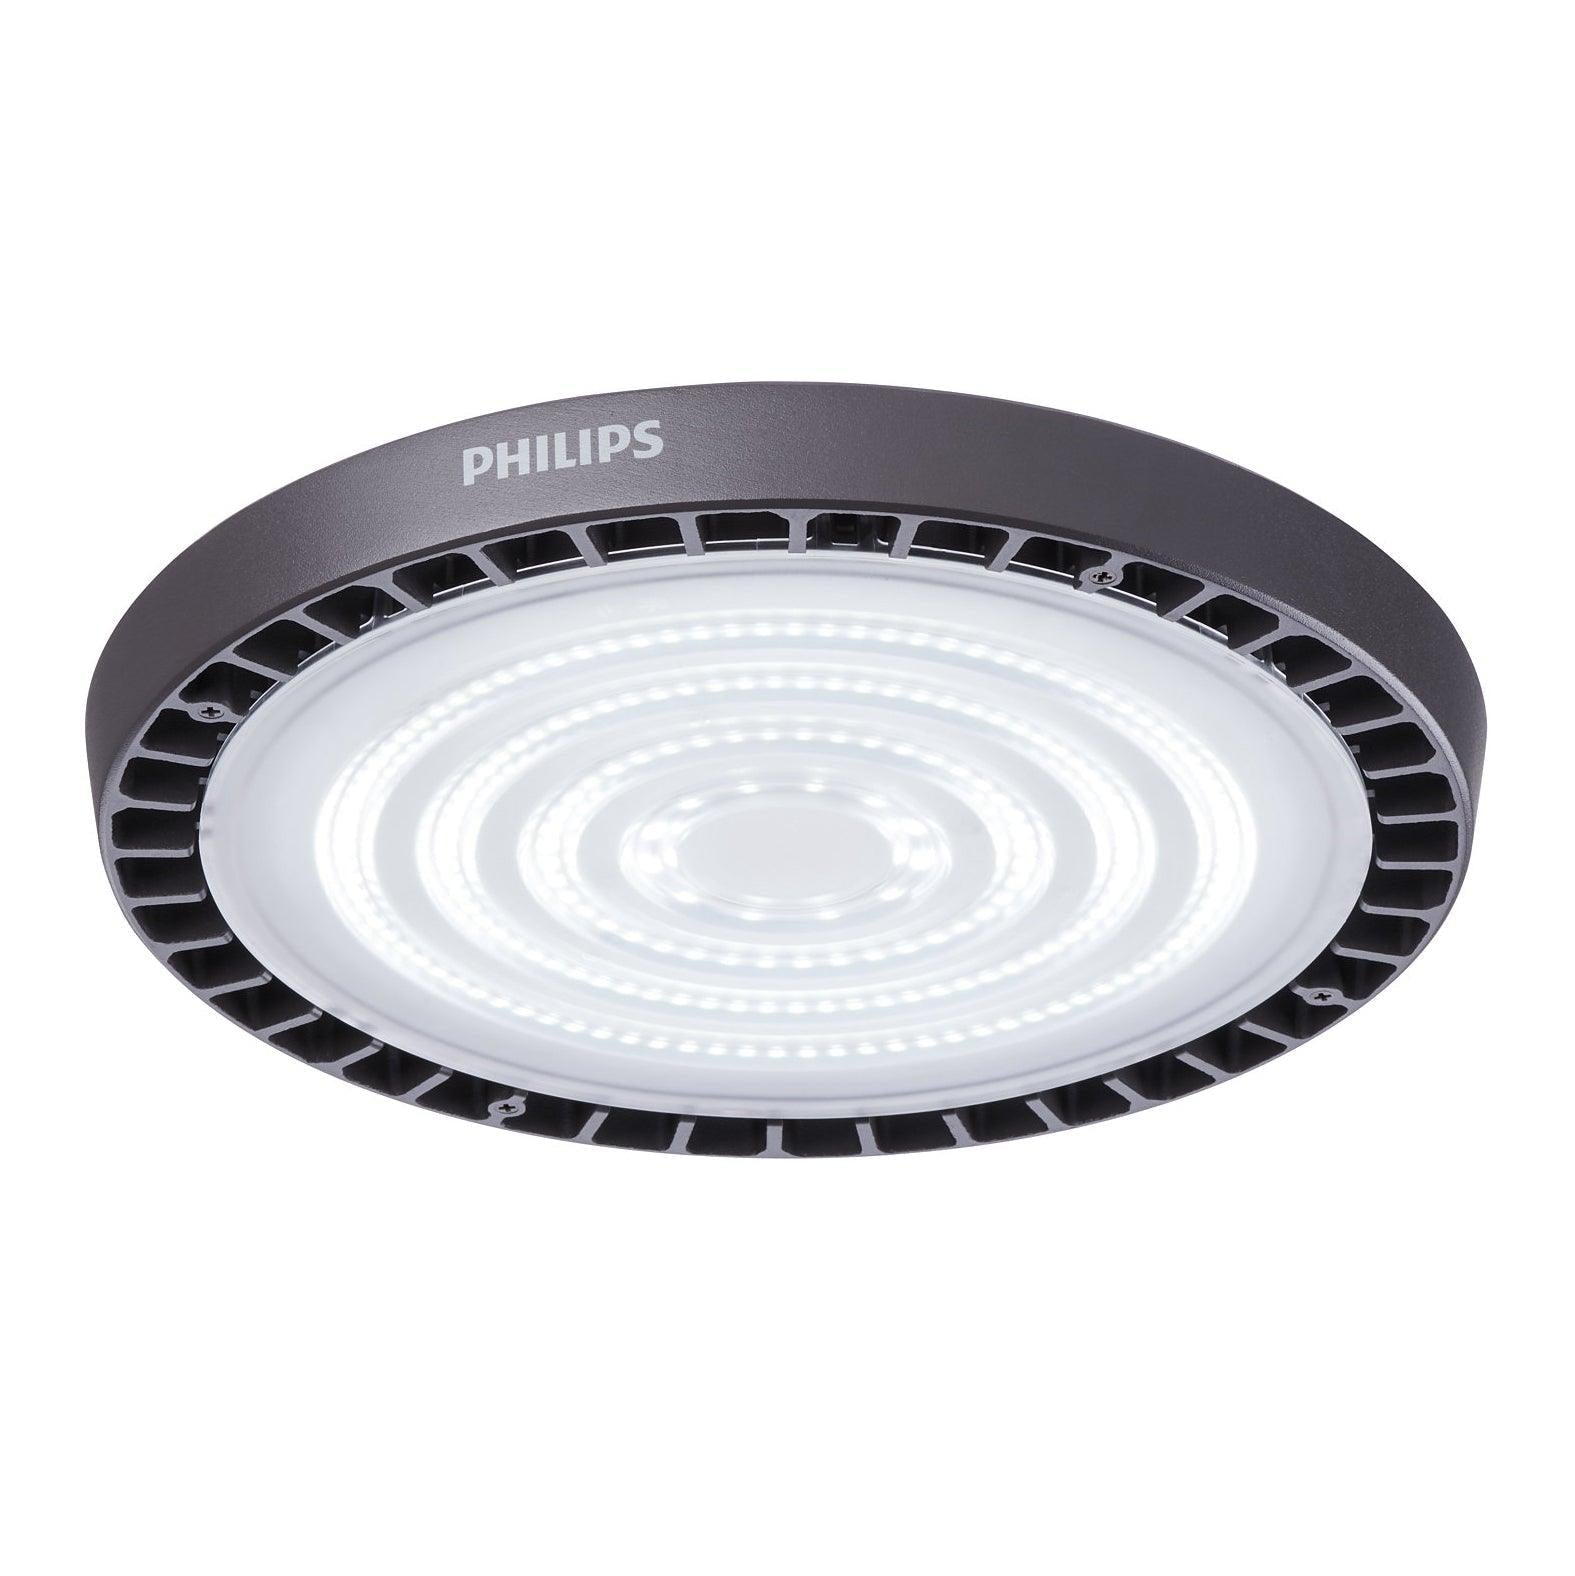 192w Philips GreenPerform LED Highbay G4, 26500lm (135lm/w), 3 Year Warranty, IP65, Gold-RS Range - Clear Sky Distributers  (7558403227835)